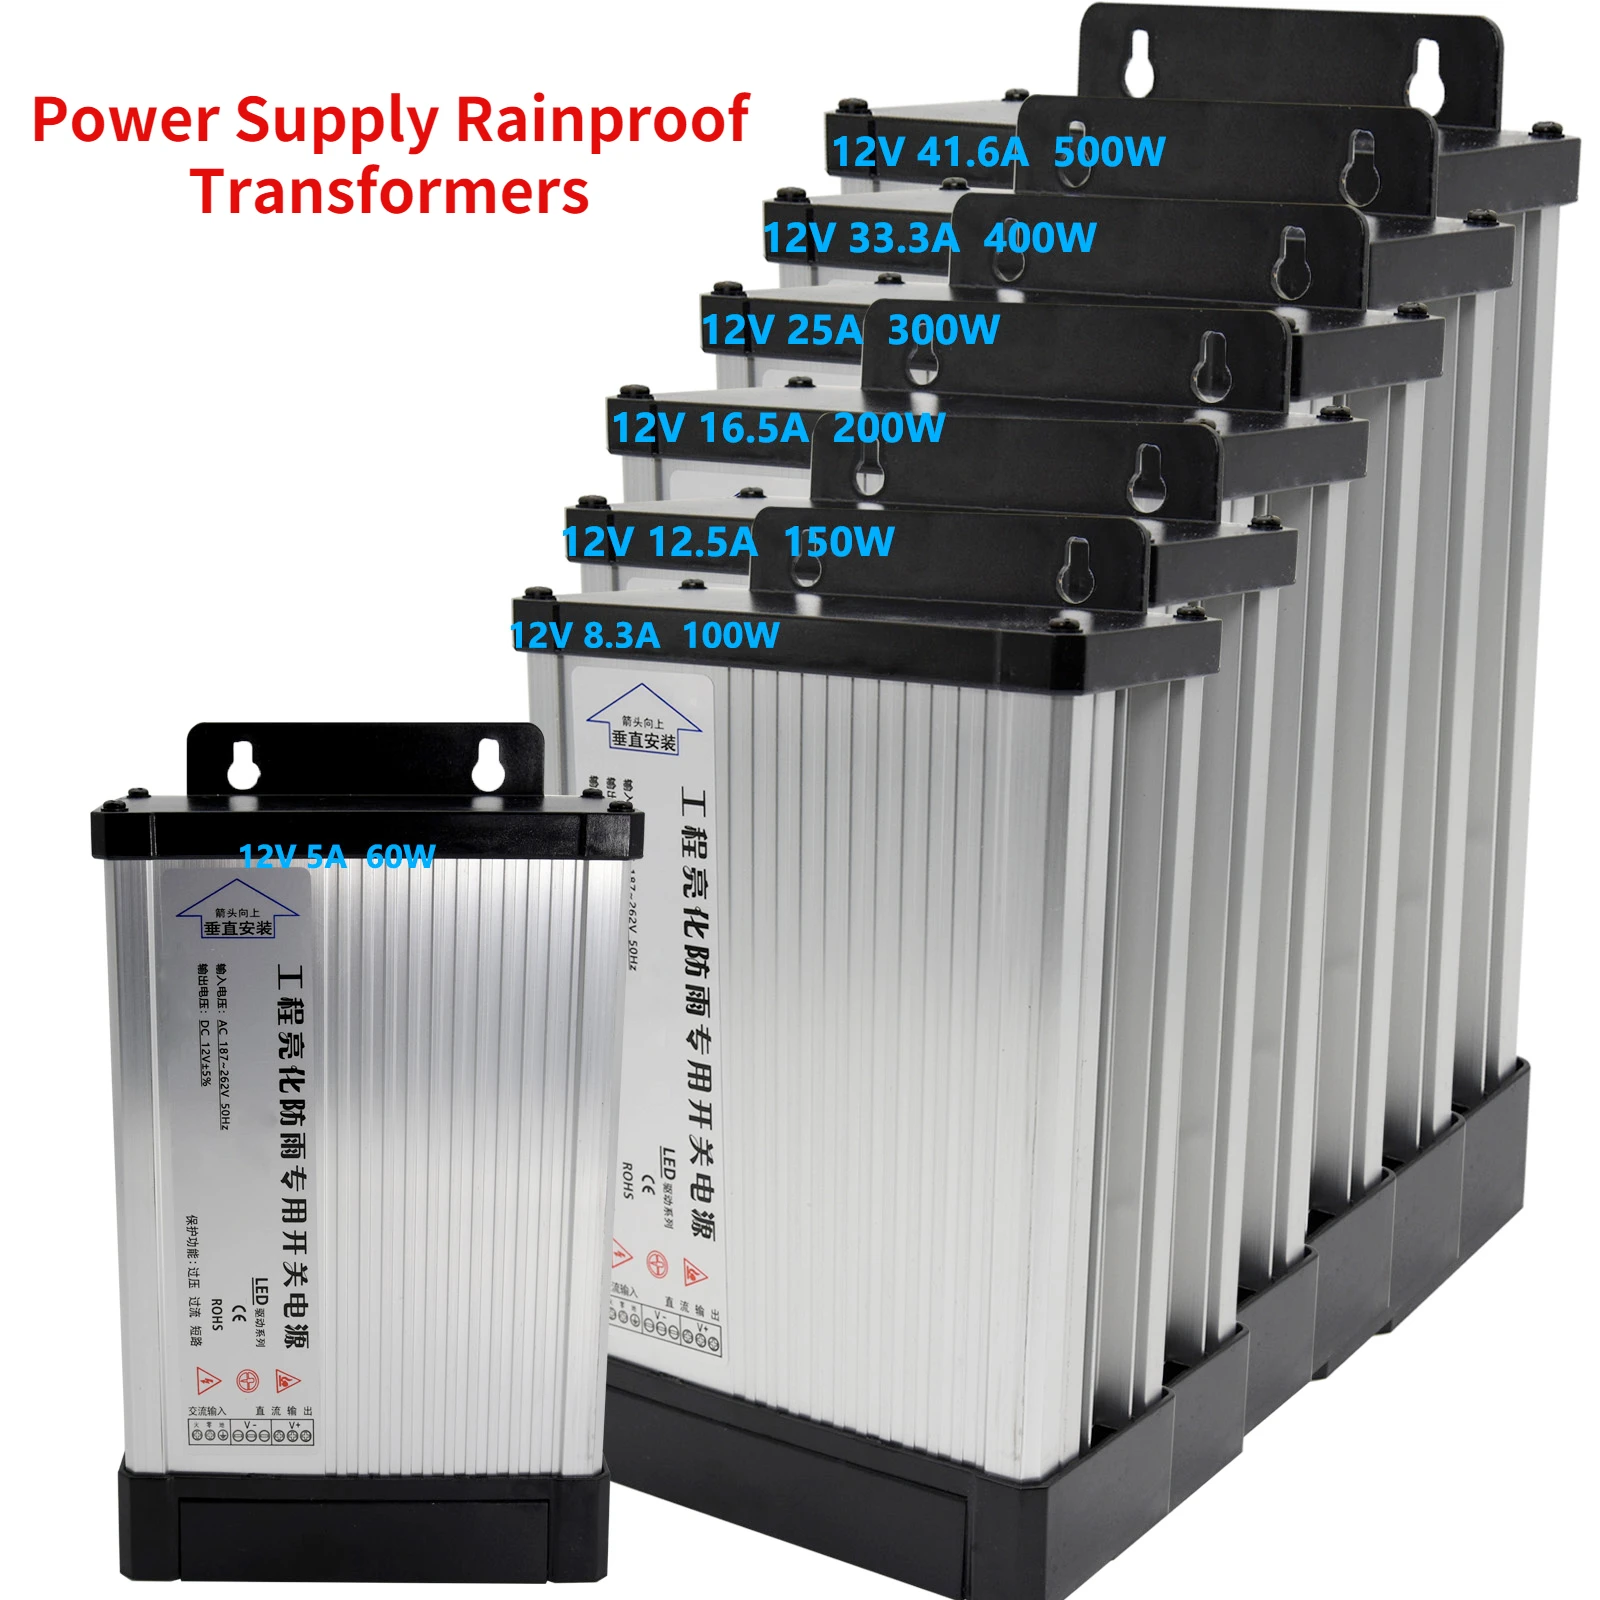 

Outdoor Switching Power Supply Rainproof Transformers DC 12V/24V/5V 500W 400W 300W 200W 100W for Led Driver Lighting Waterproof